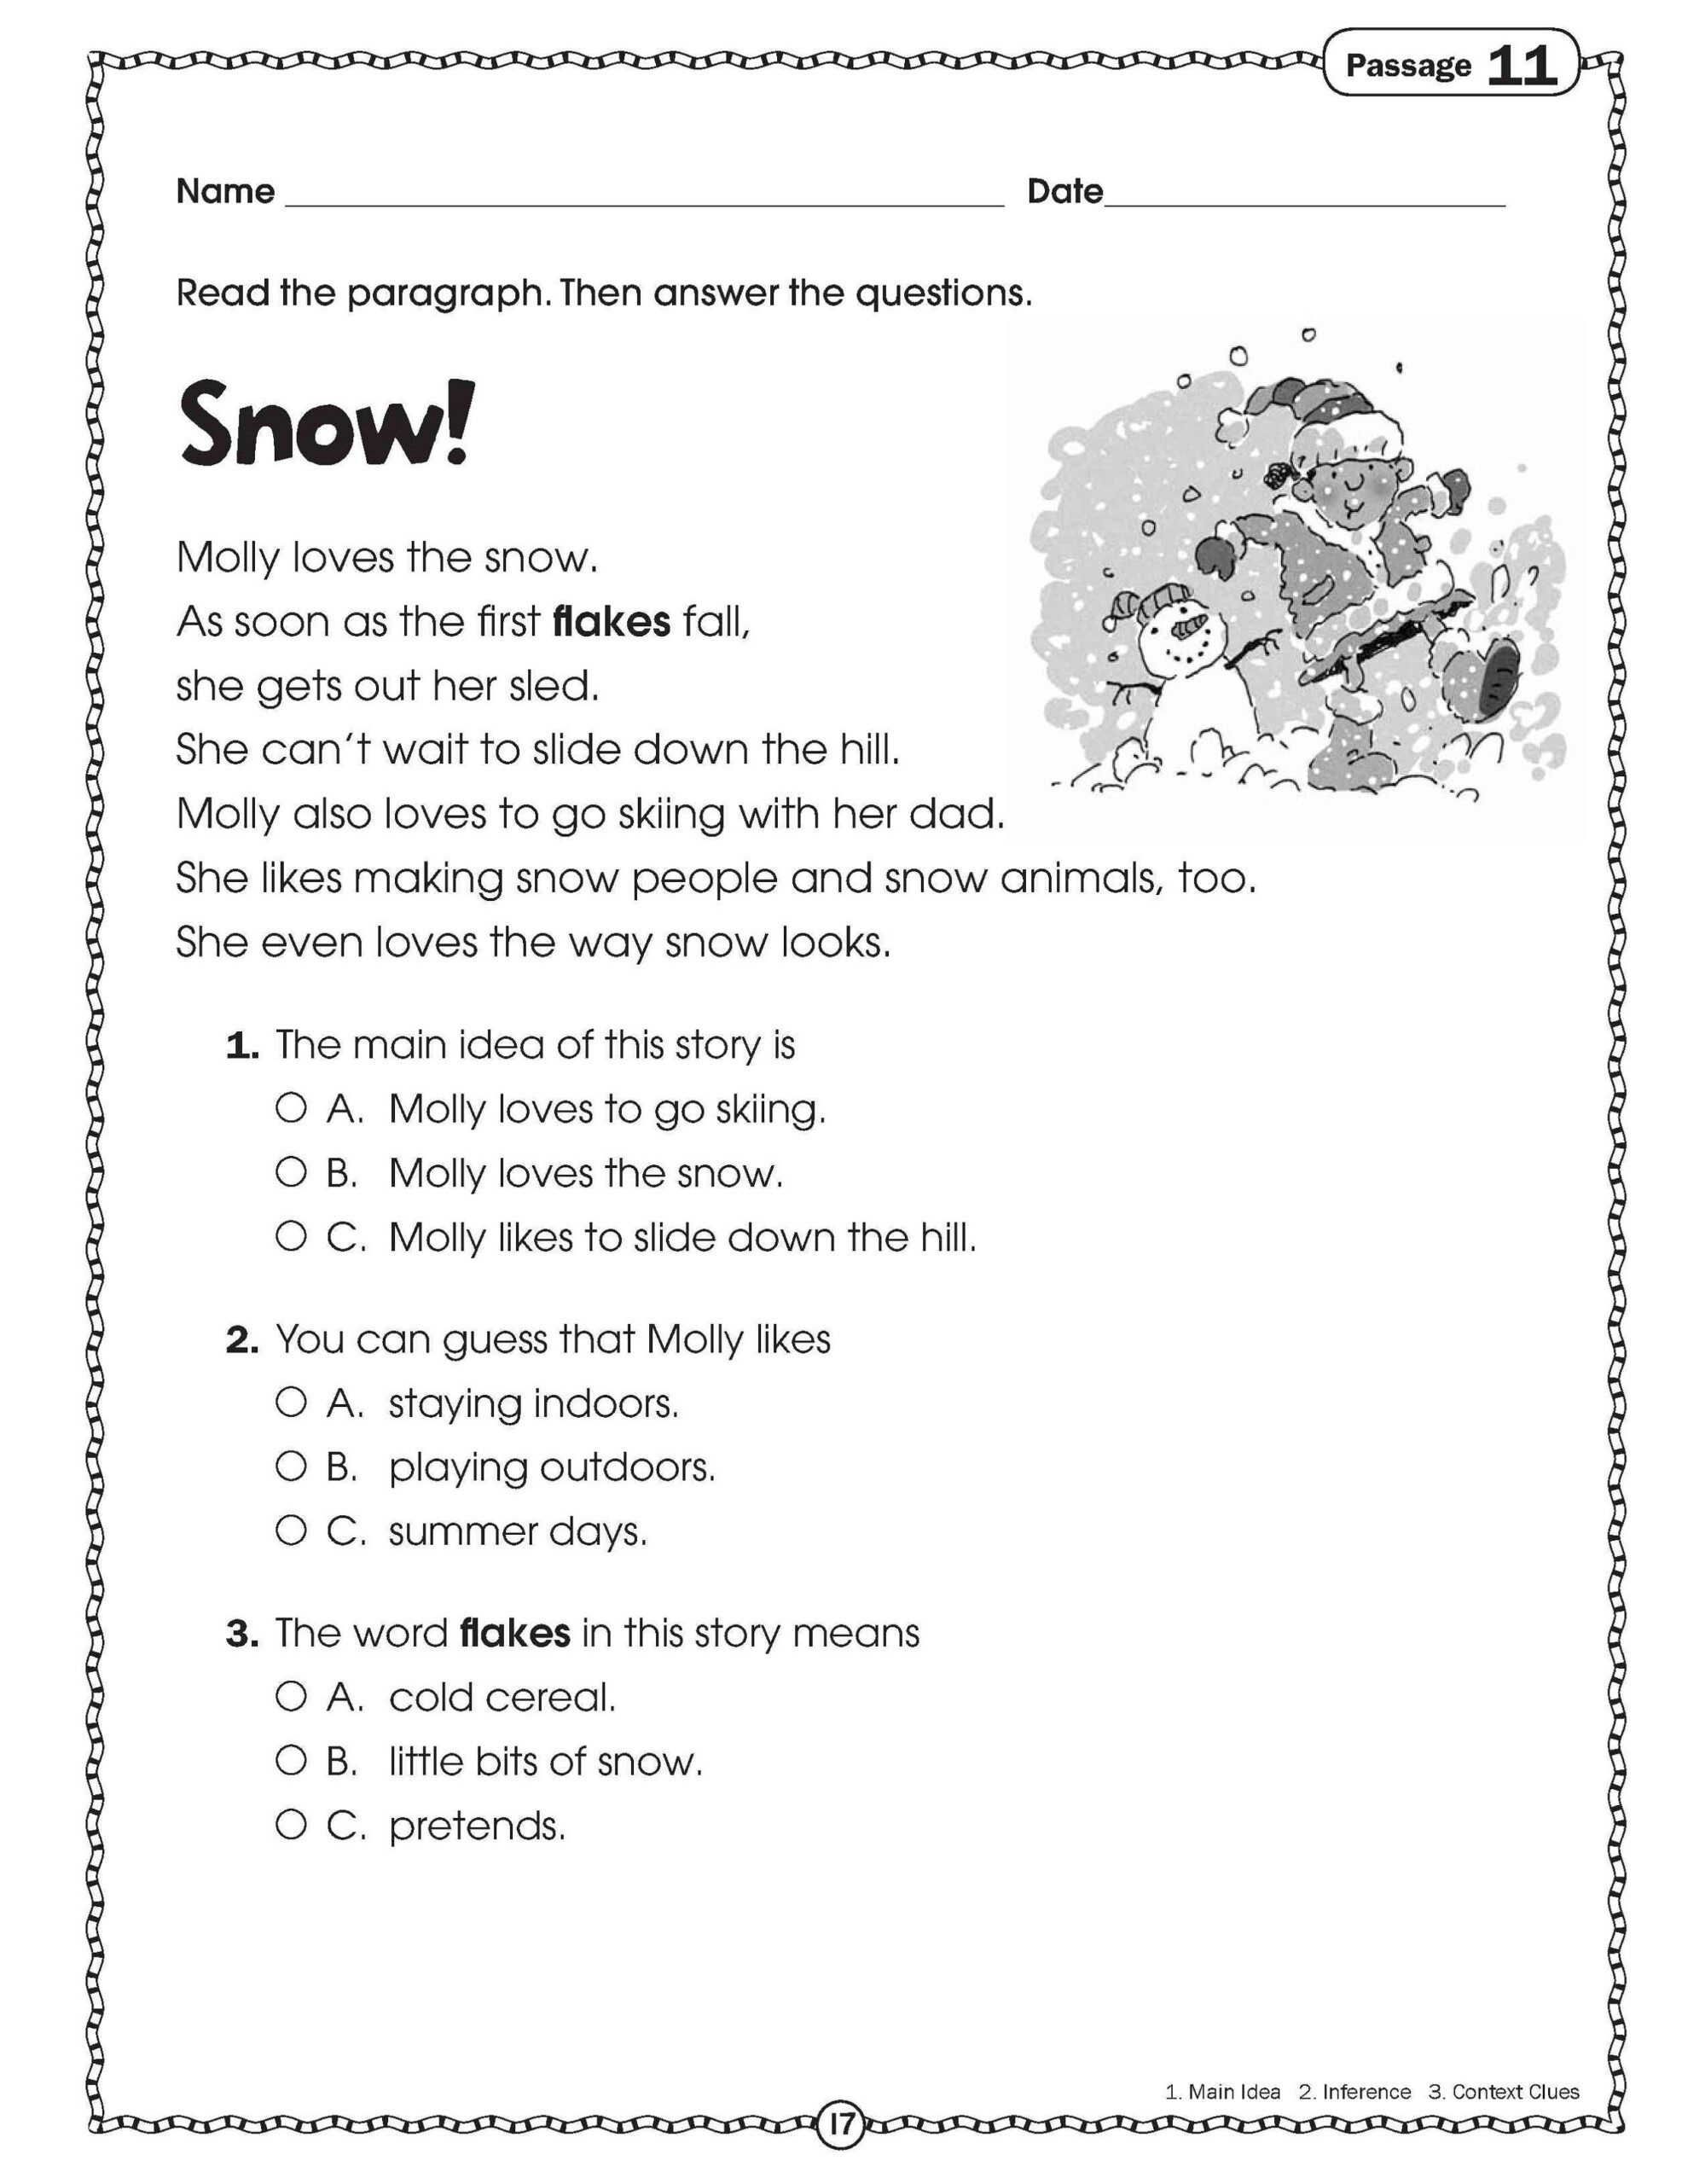 Free Handouts For Learning | Comprehension Worksheets